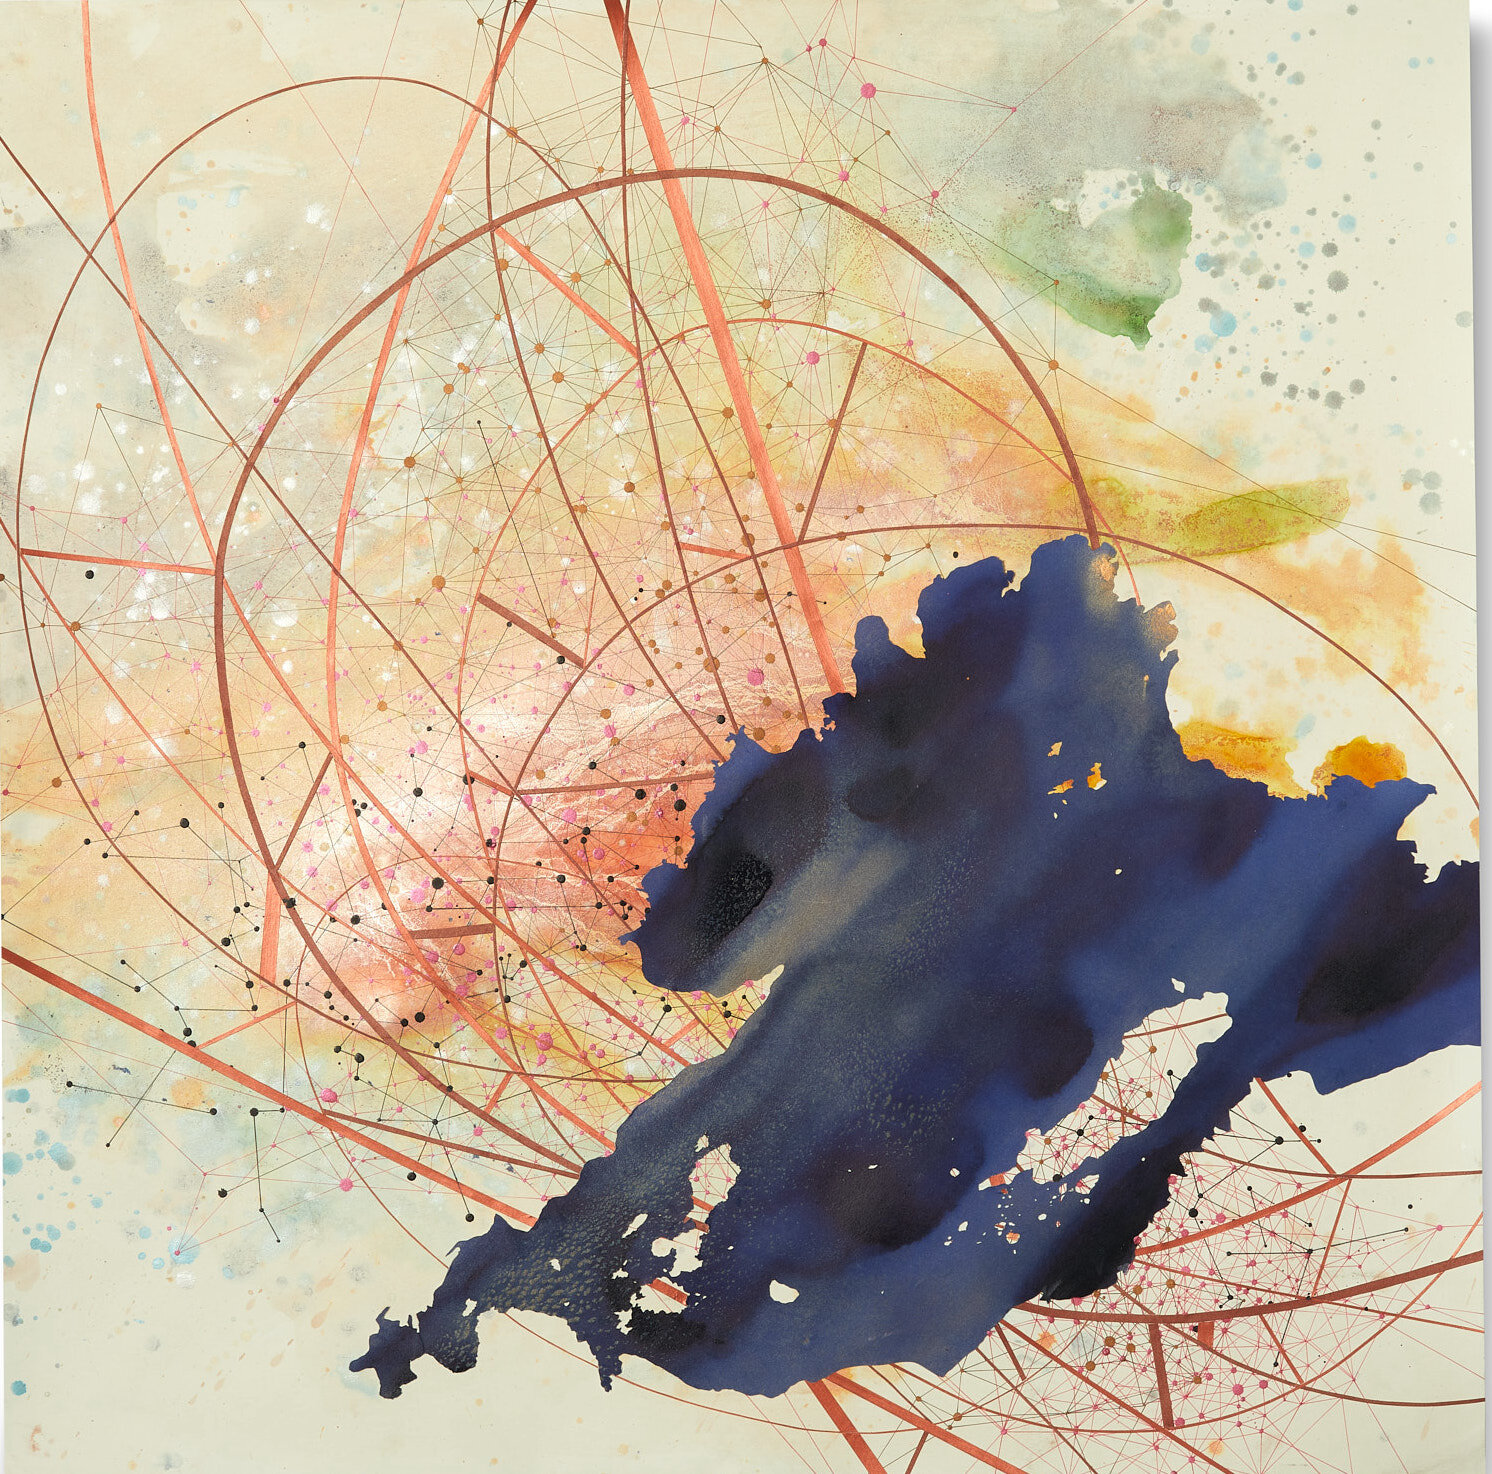  Val Britton,  Reverberation #71  , 2021, acrylic, ink, and collage on paper 36 x 36 inches (91.4 x 91.4 cm) 